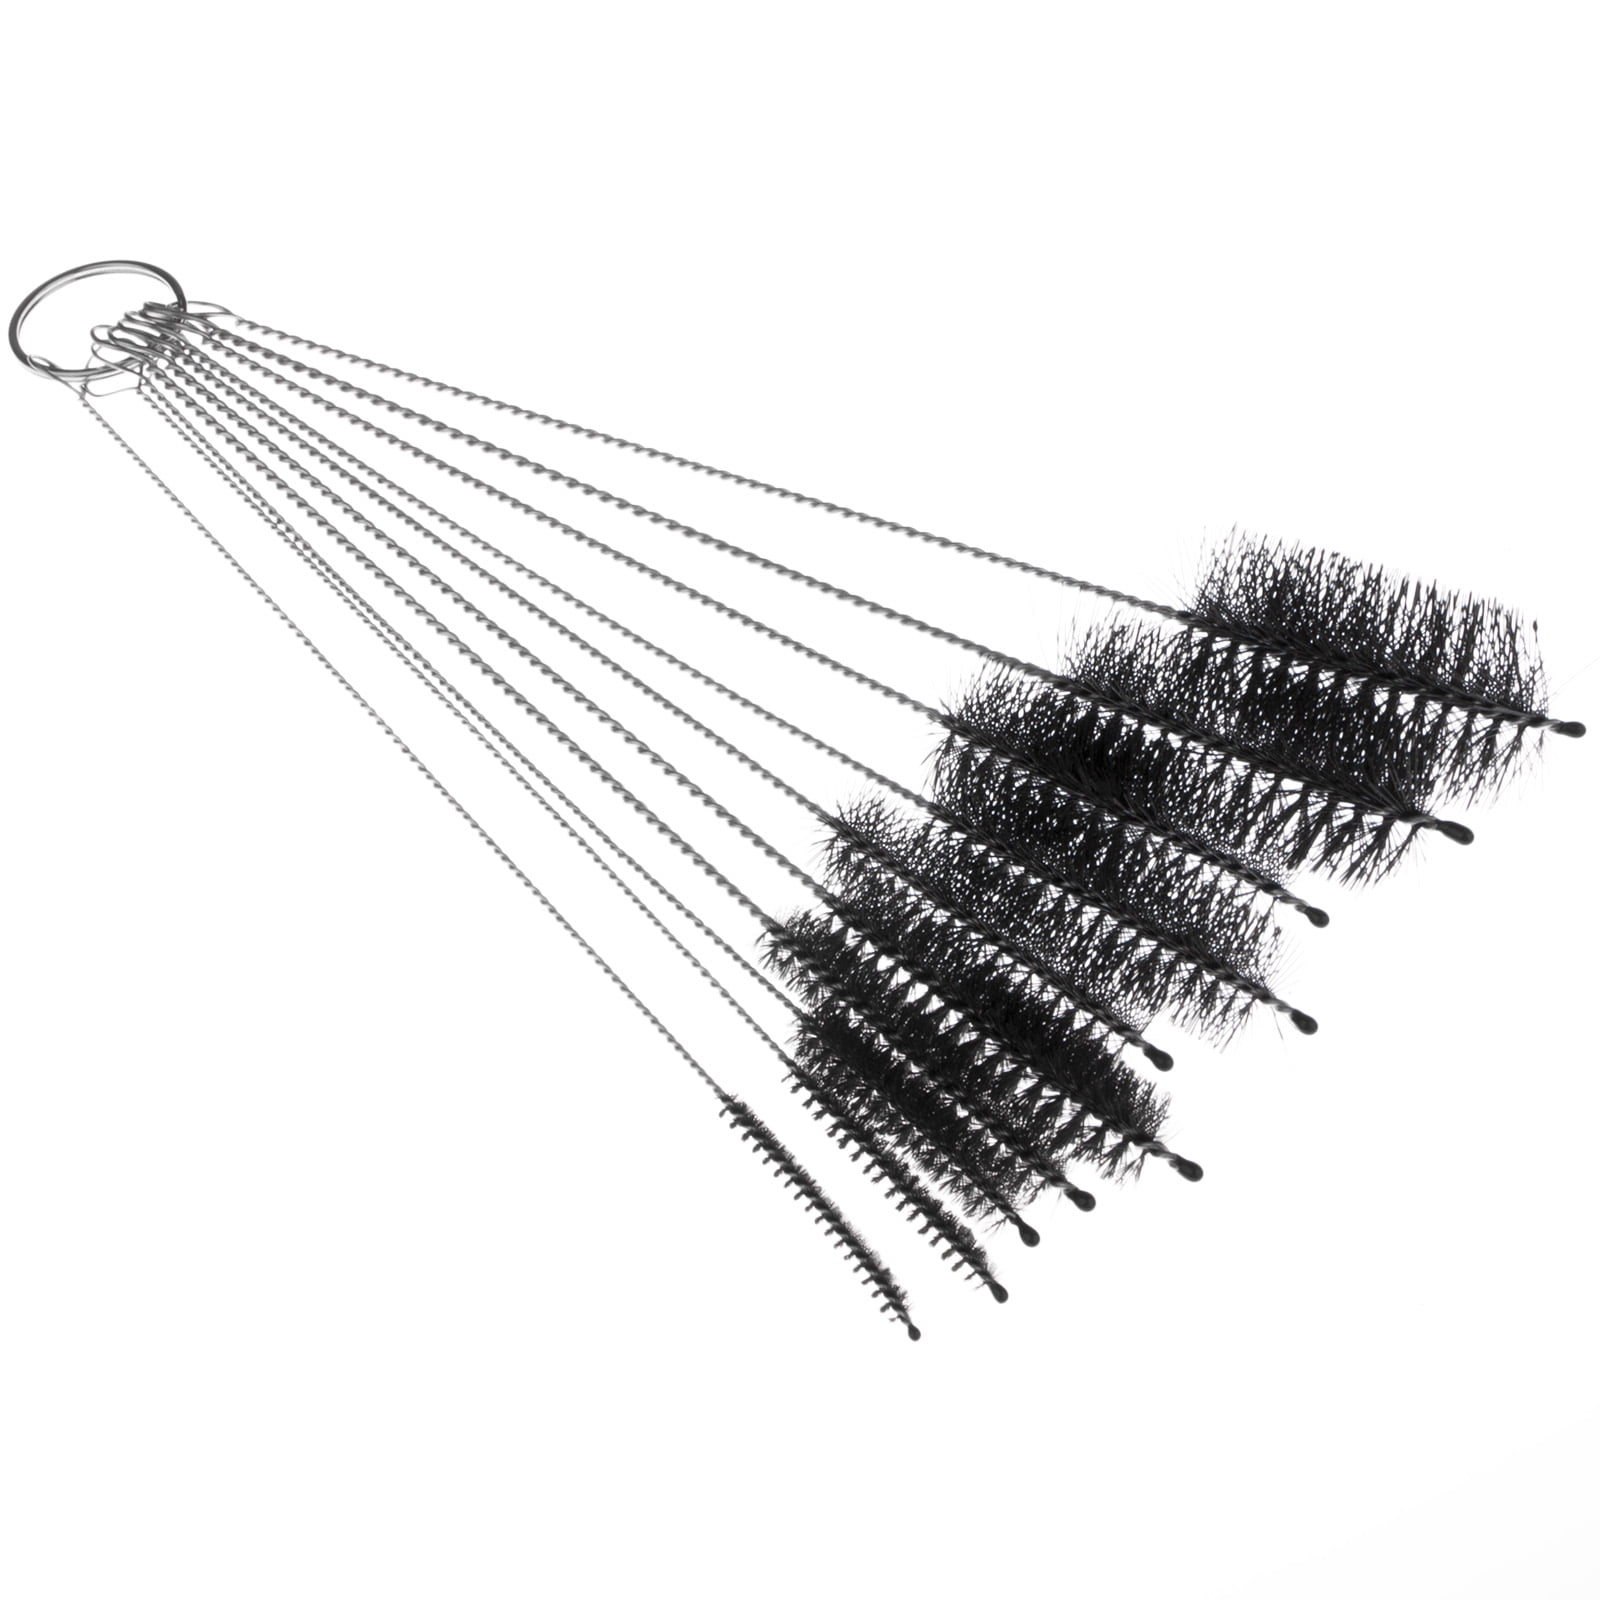 Bottle Brush Small Nylon Pipe Cleaner Brushes Suitable for cleaning narrow areas Set for Bottle Glasses Straw Plug Holes Cleaning,Coffee Machine Cleaning Brush 13PCS Black